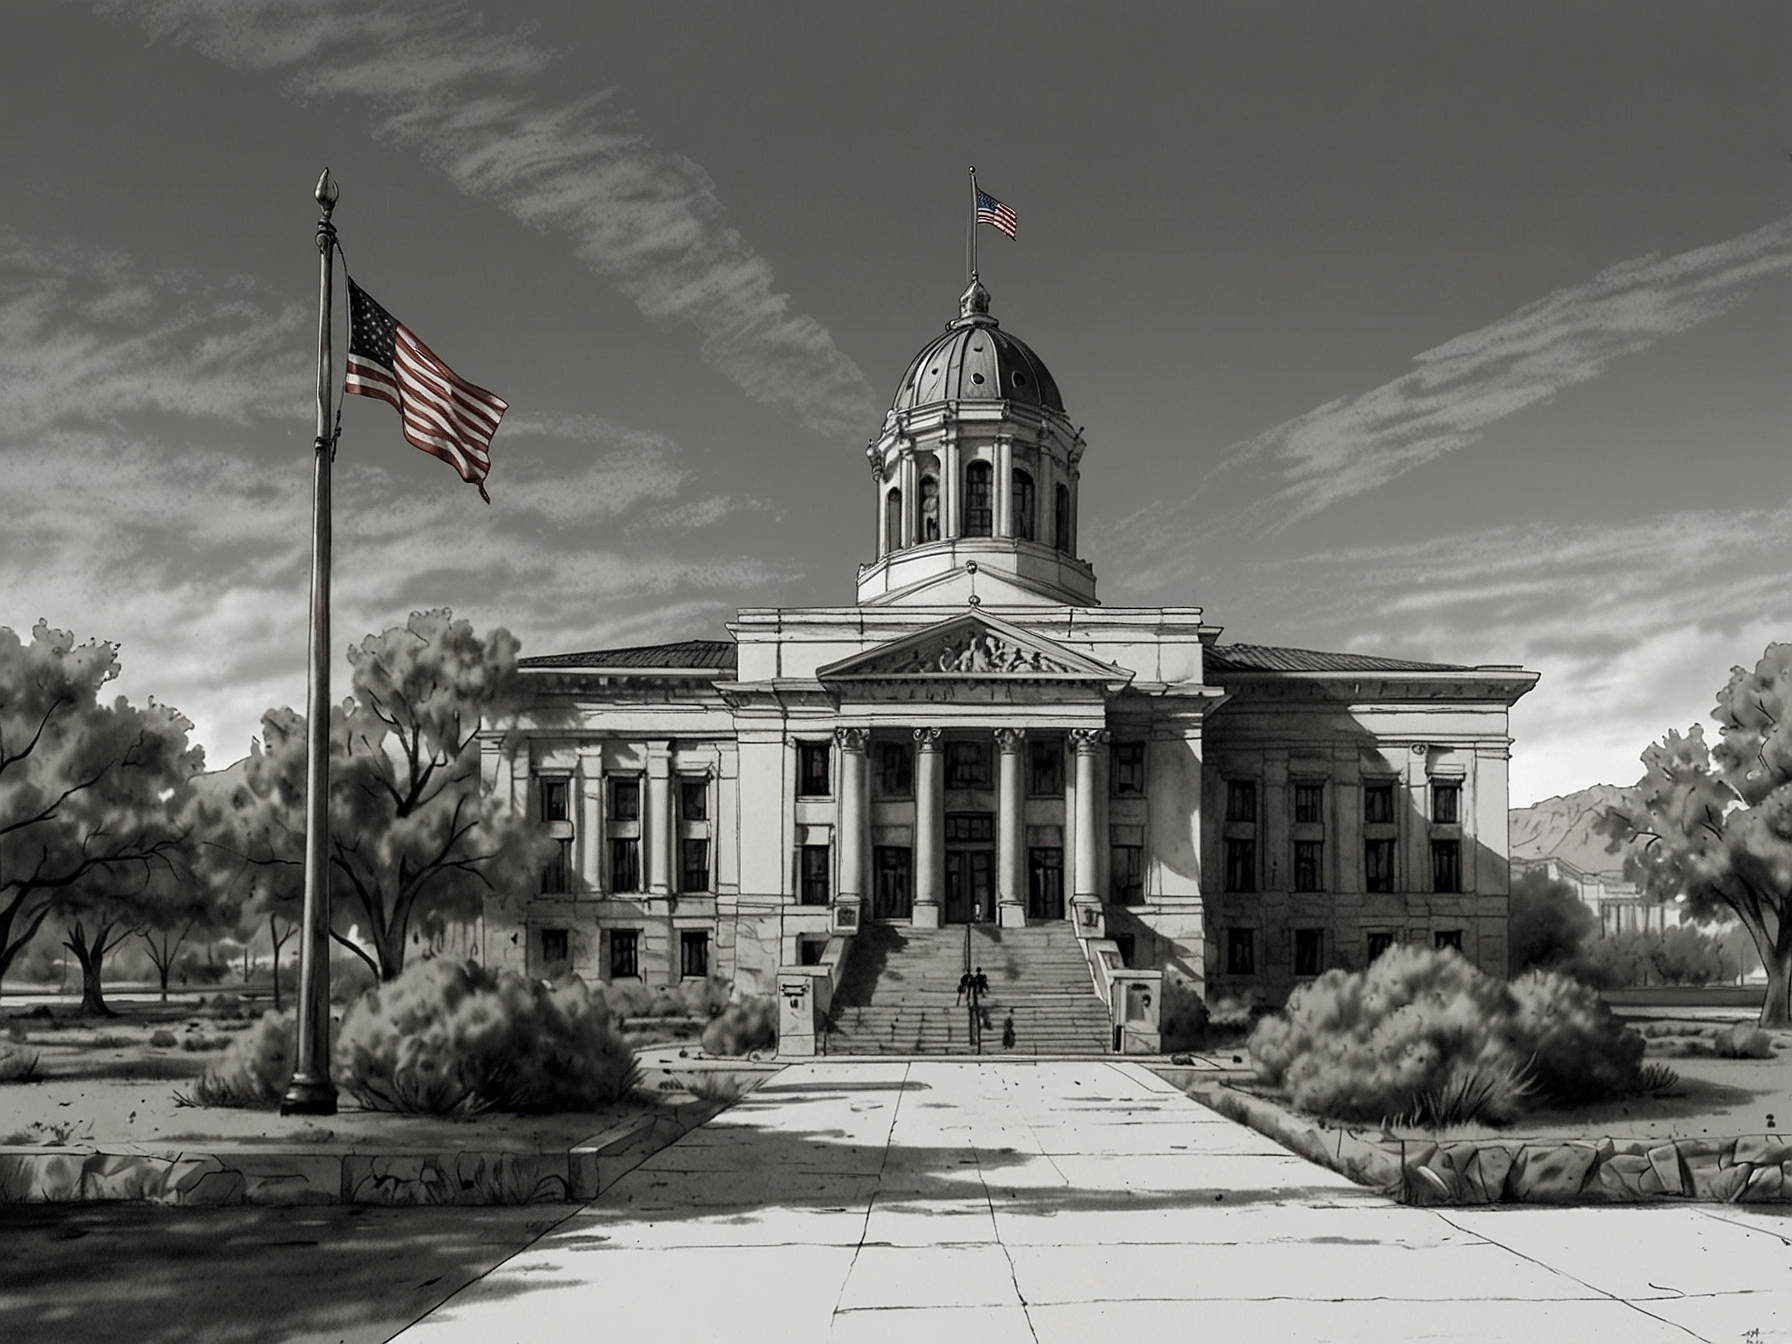 Image of Nevada courthouse where Judge James Russell dismissed the 'fake electors' case, emphasizing the lack of evidence in Trump's legal challenge regarding the 2020 election.